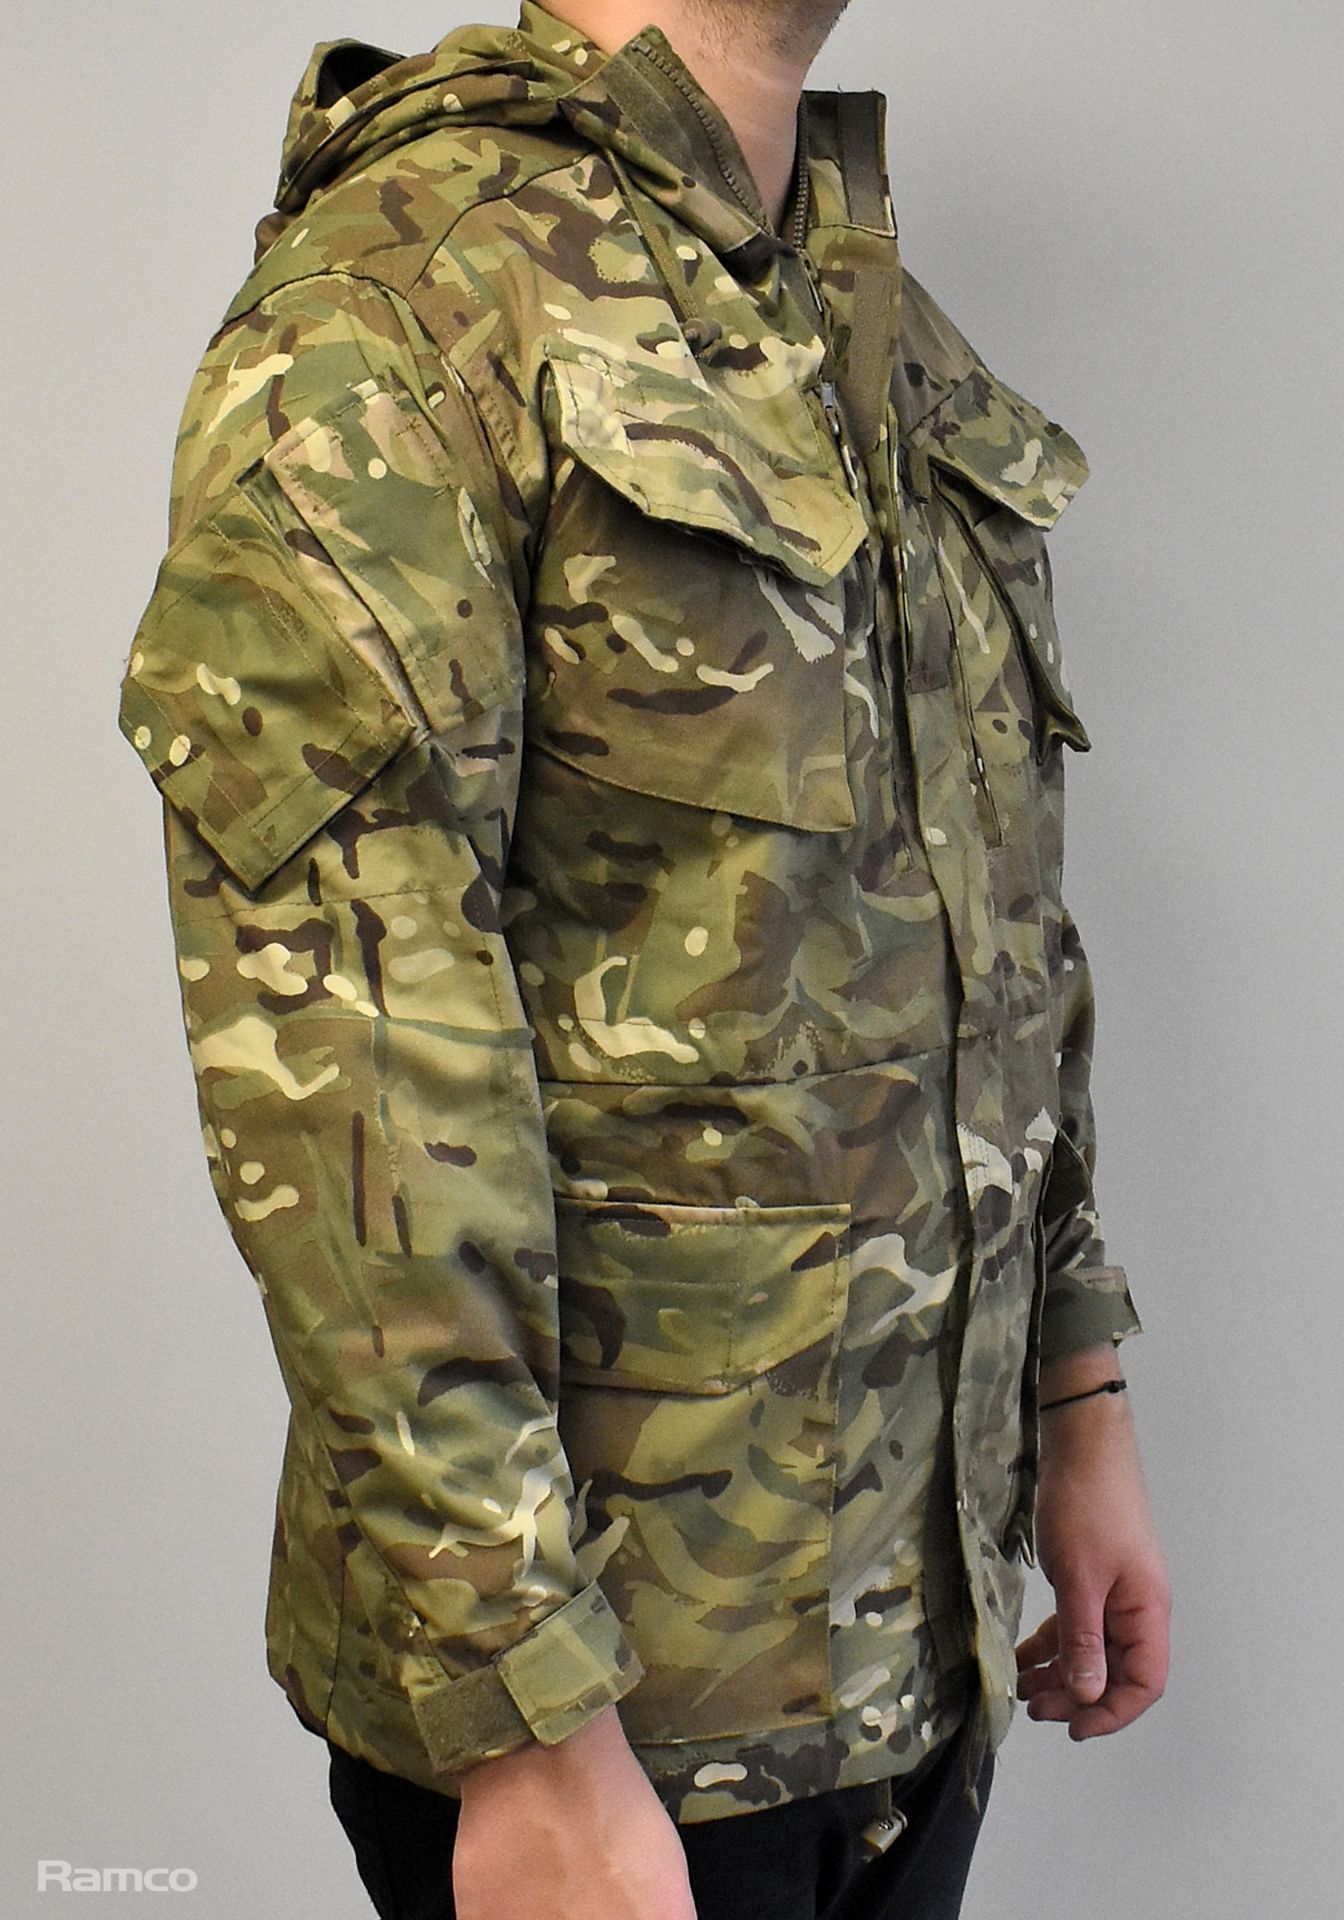 50x British Army MTP combat smocks 2 windproof - mixed grades and sizes - Image 4 of 12